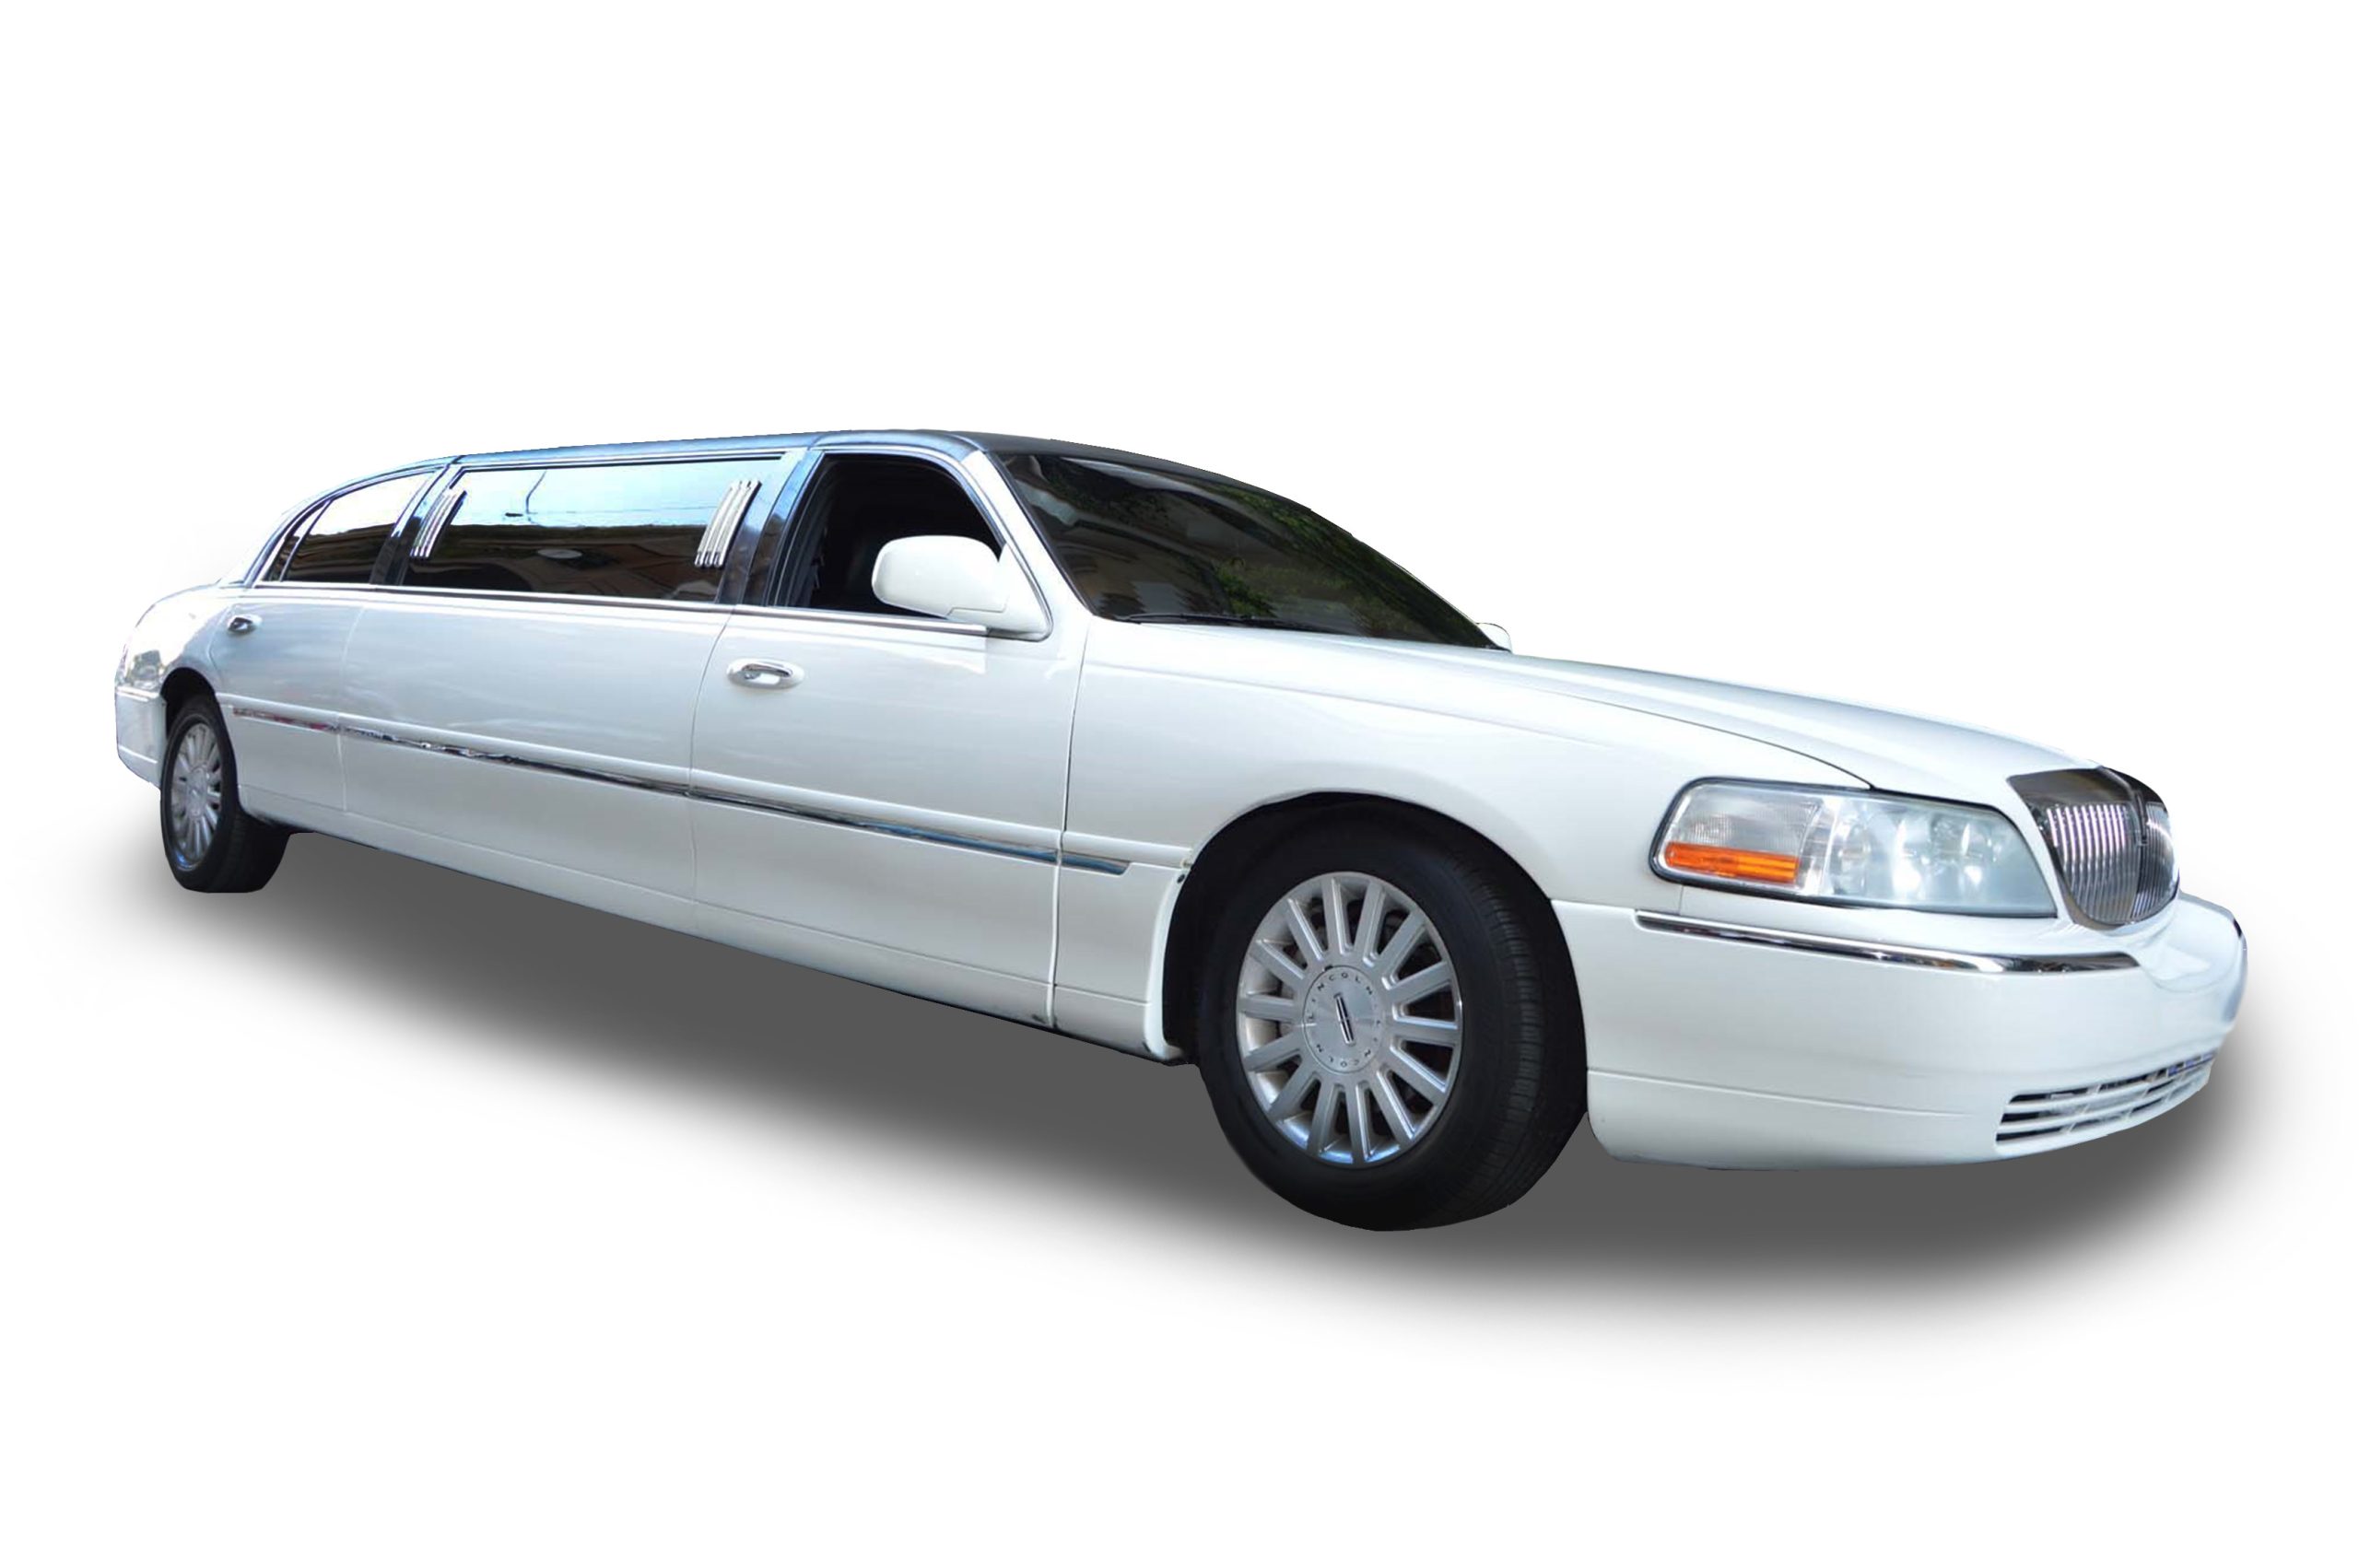 Wollongong limo transprtation for your luxurious experience, special events, proms, weddings, or special nights out in Sydney